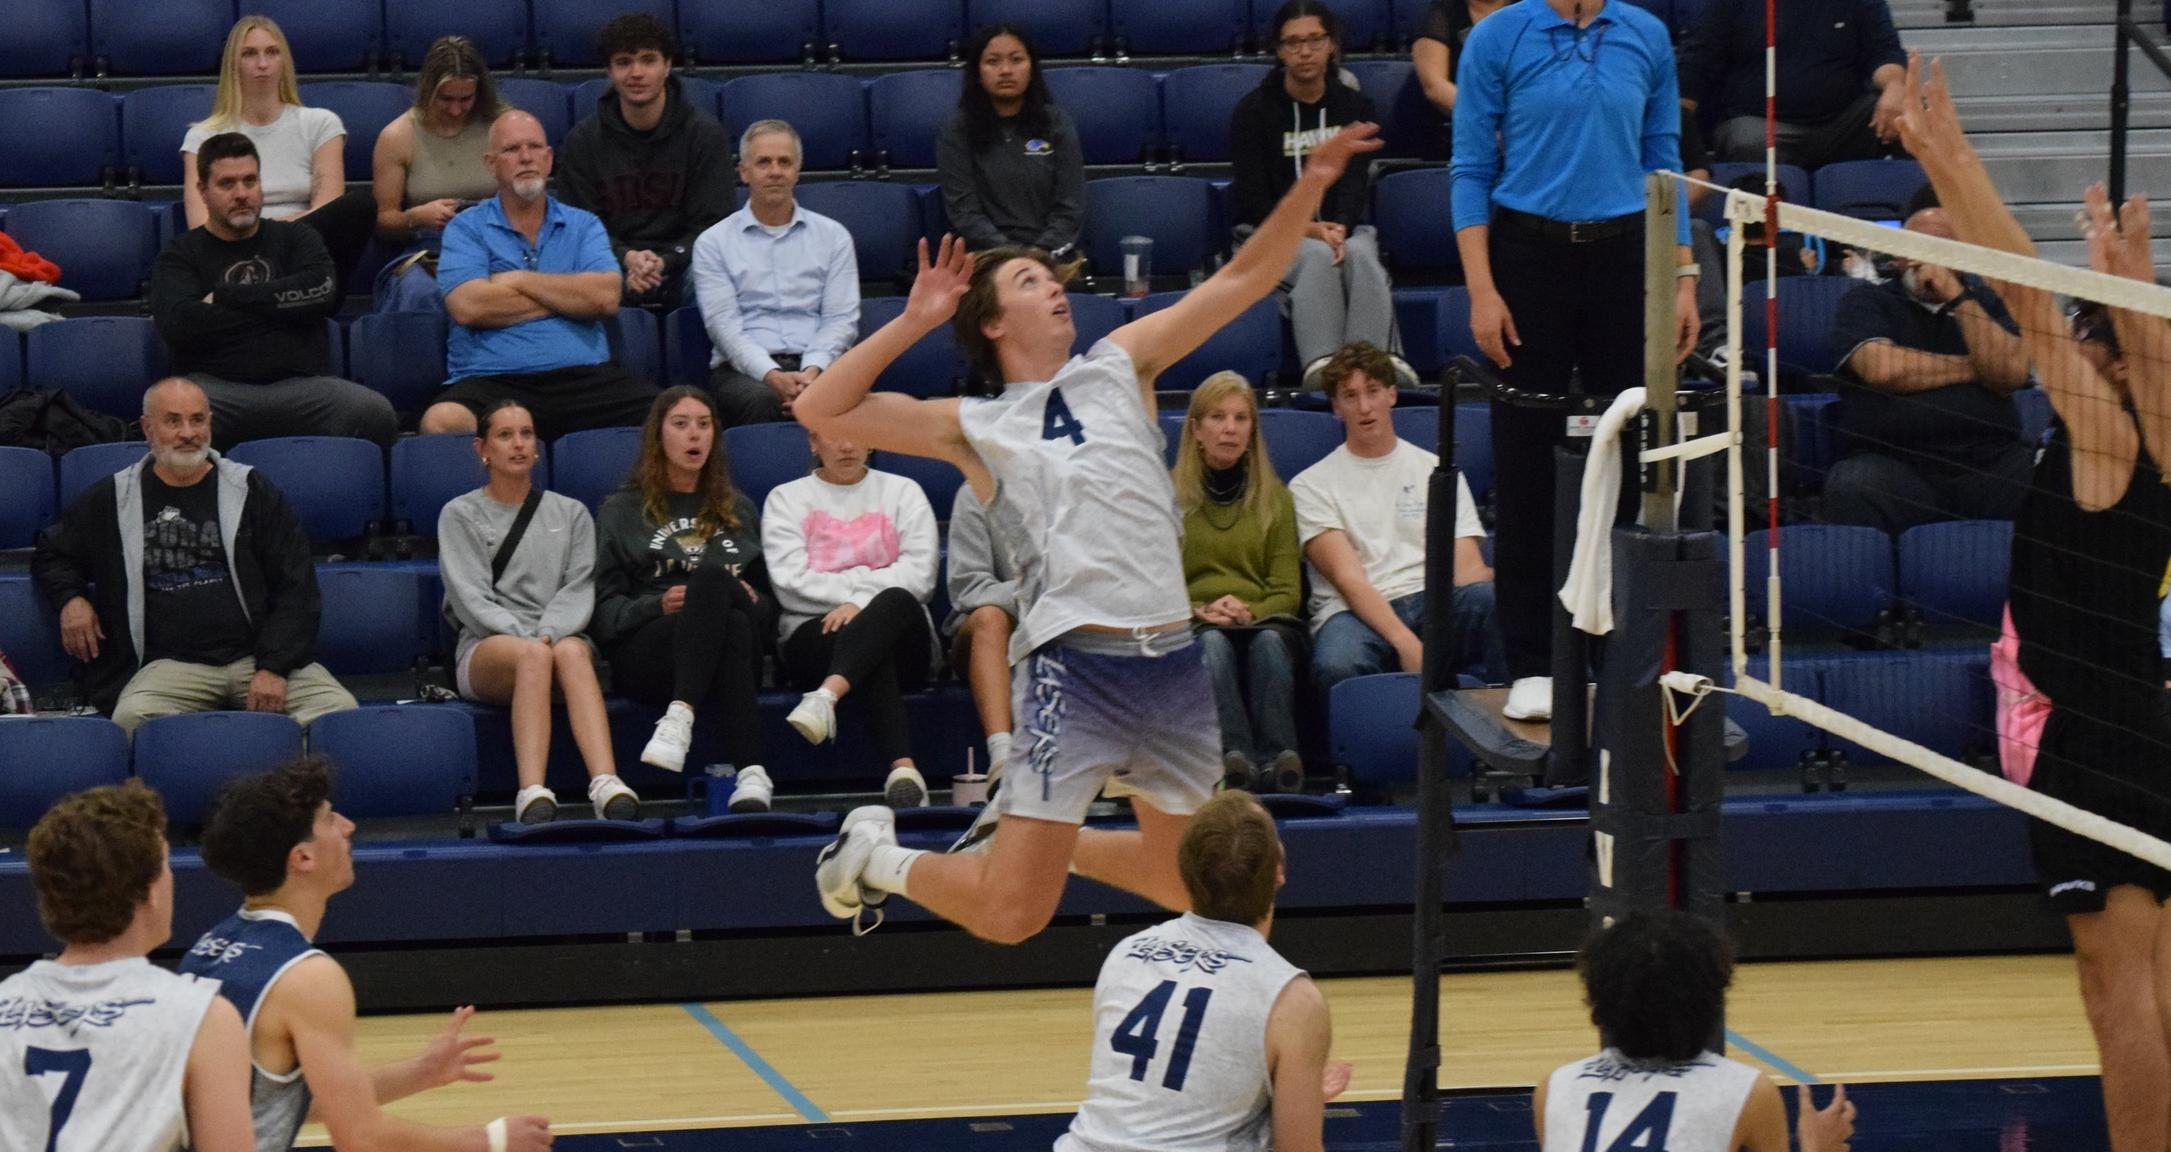 No. 4 in the state men's volleyball team sweeps the Hawks